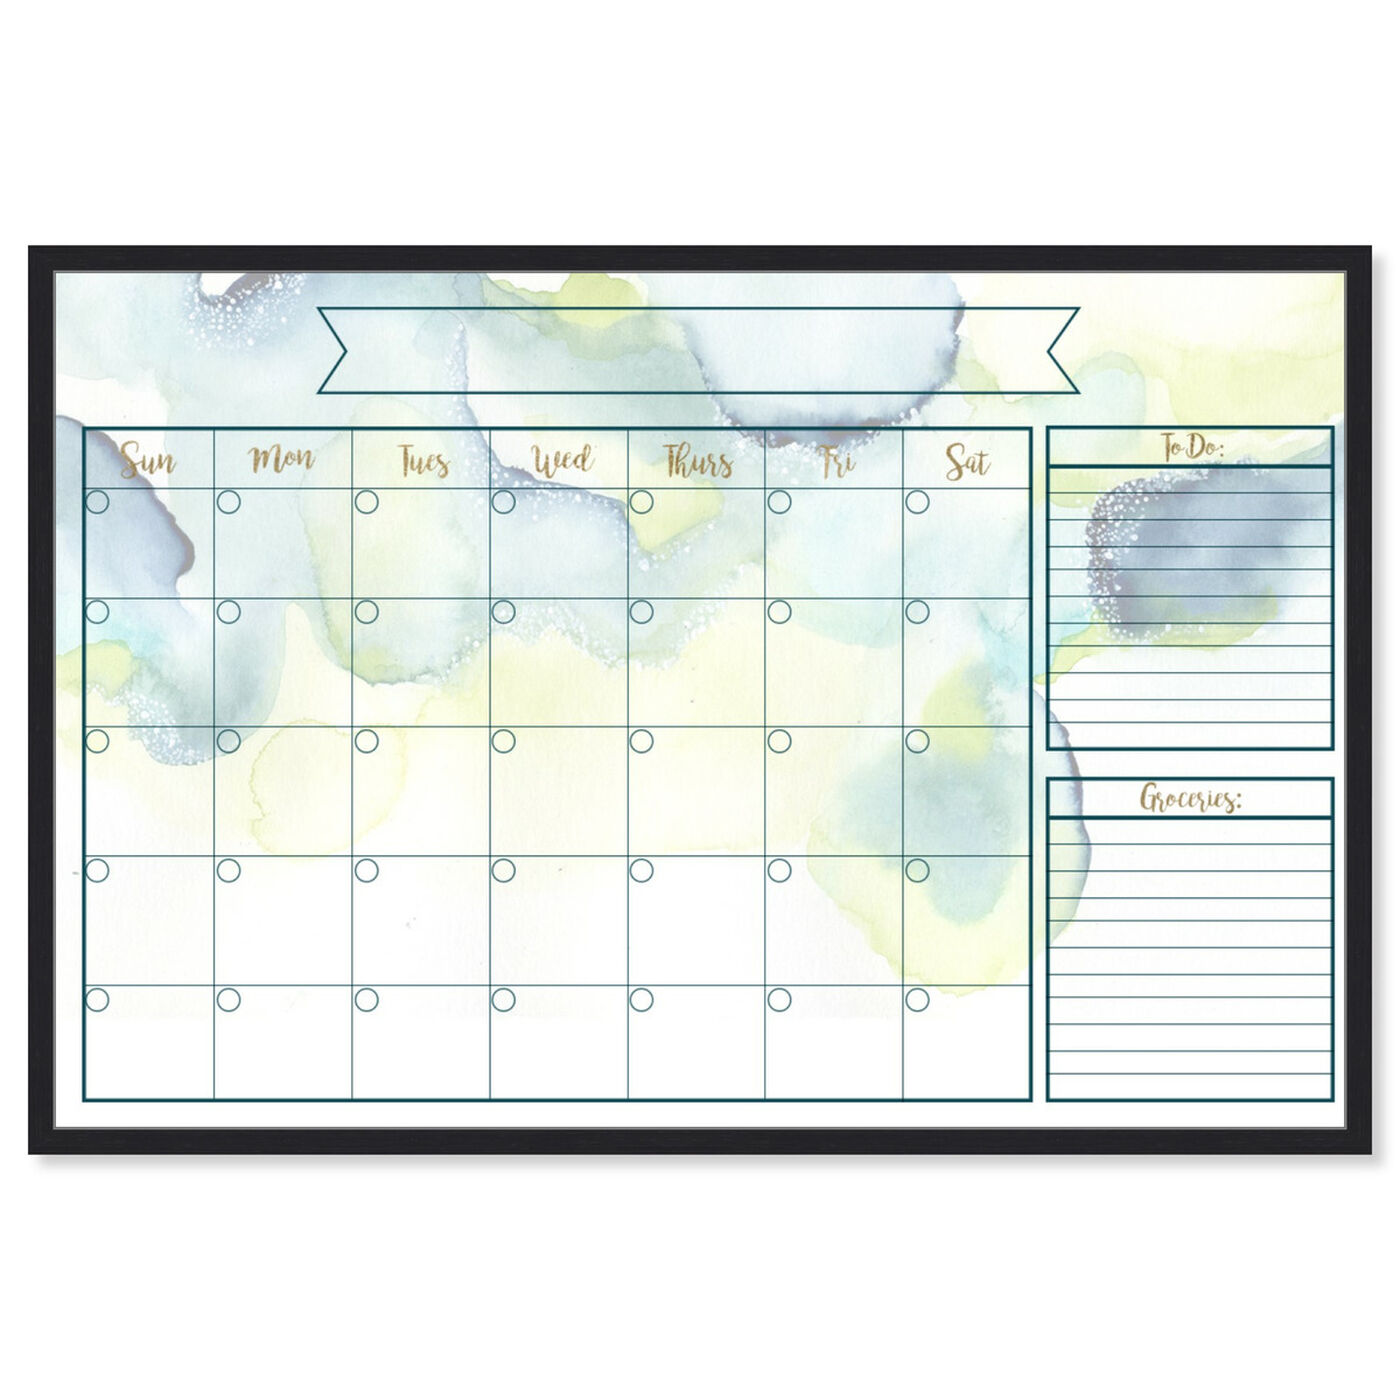 Front view of Watercolor Calendar featuring education and office and whiteboards art.